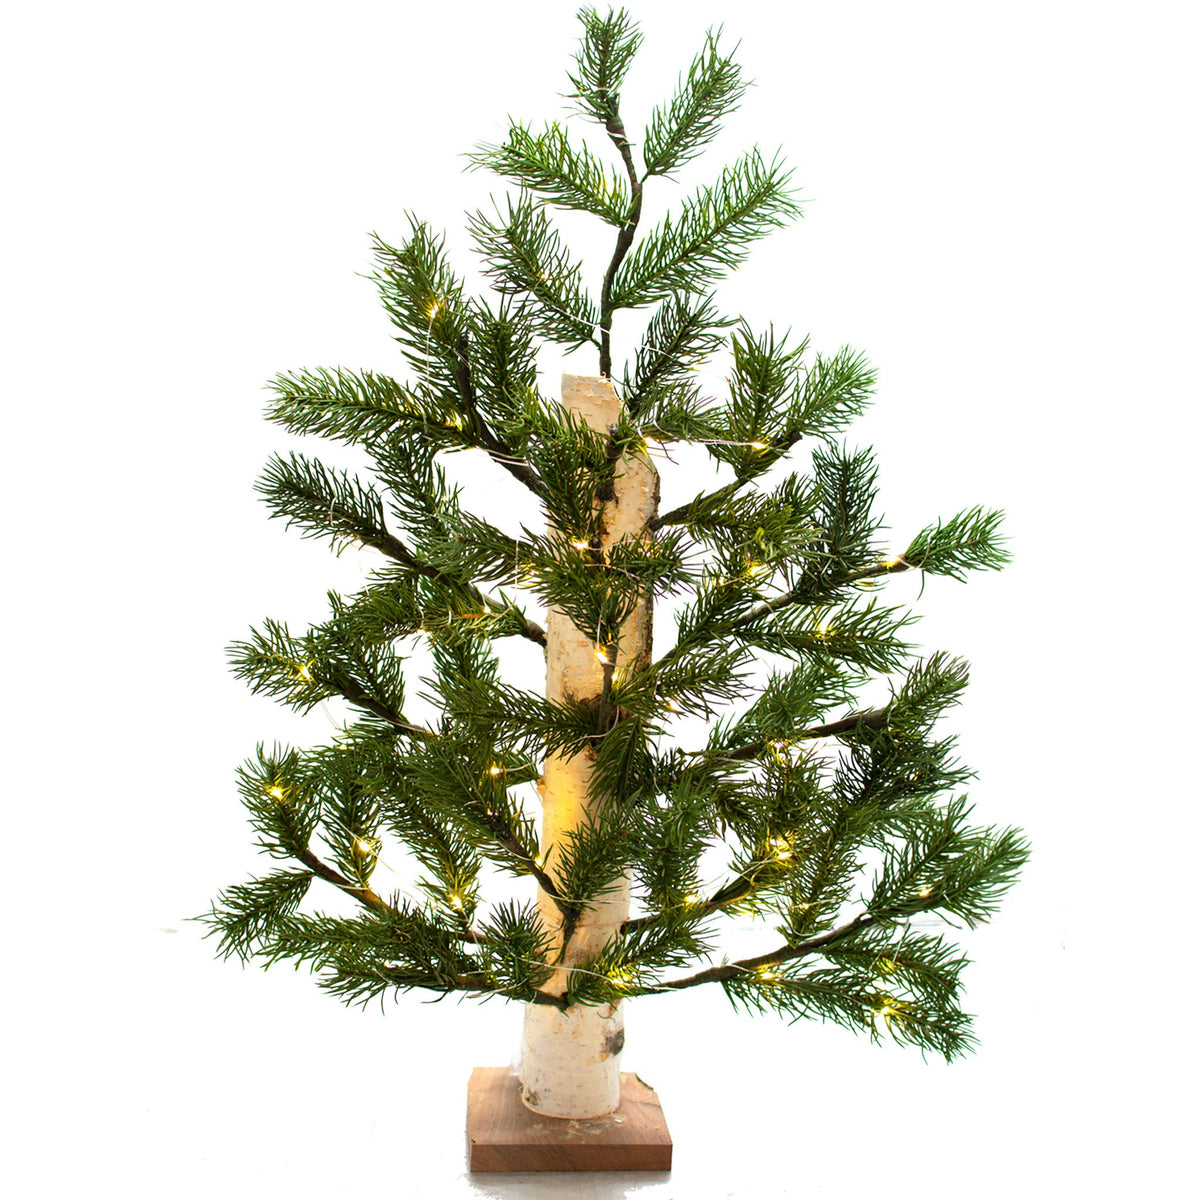 18 inch tall Birch Pole Christmas Trees and Holiday Centerpieces on sale at leedisplay.com